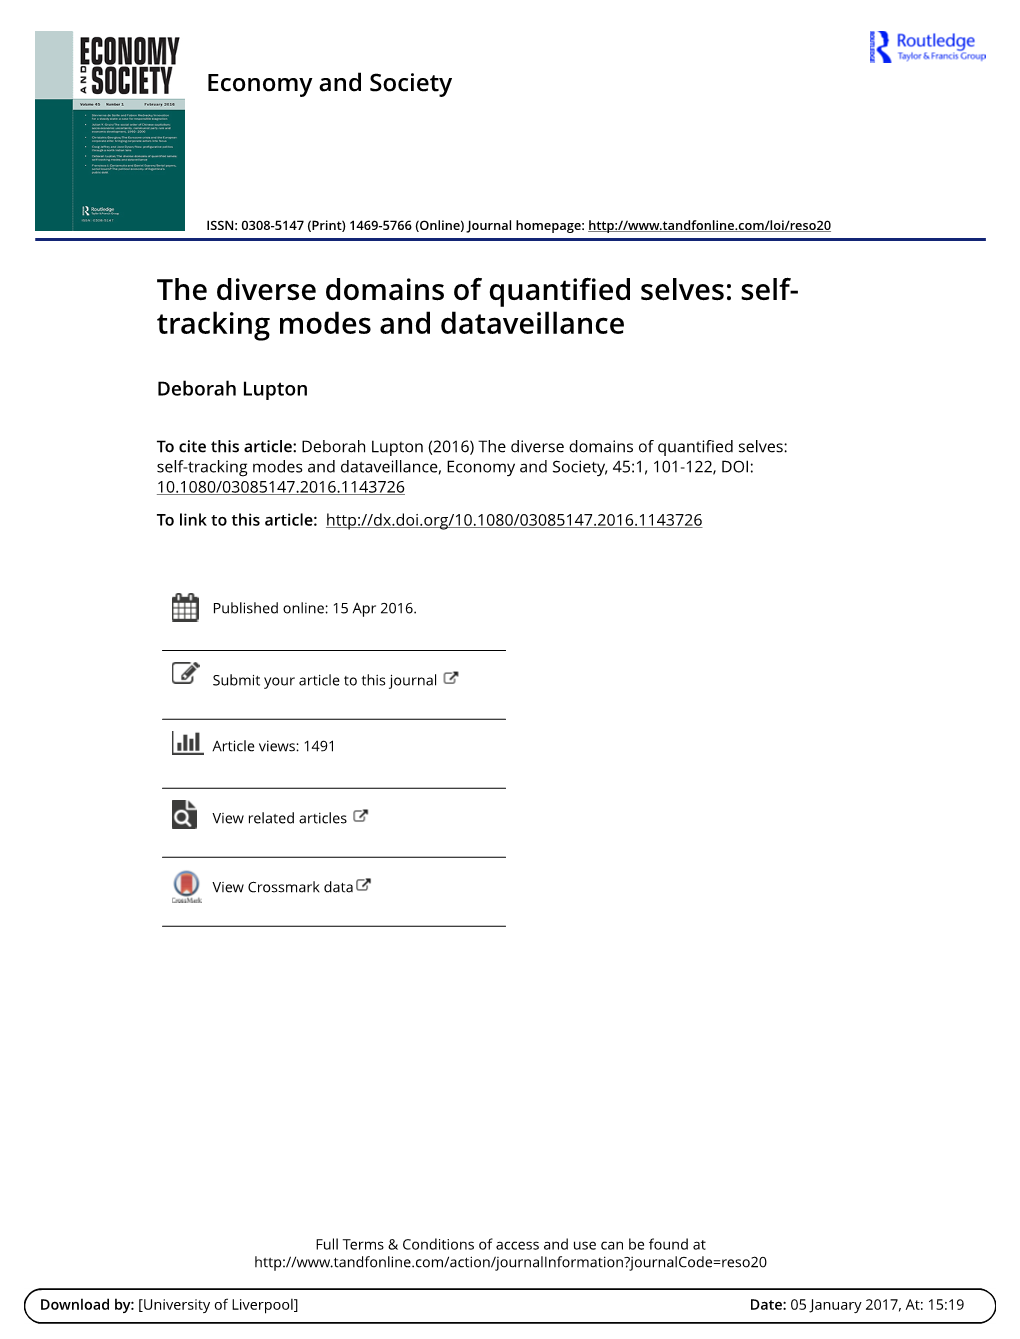 The Diverse Domains of Quantified Selves: Self-Tracking Modes and Dataveillance, Economy and Society, 45:1, 101-122, DOI: 10.1080/03085147.2016.1143726